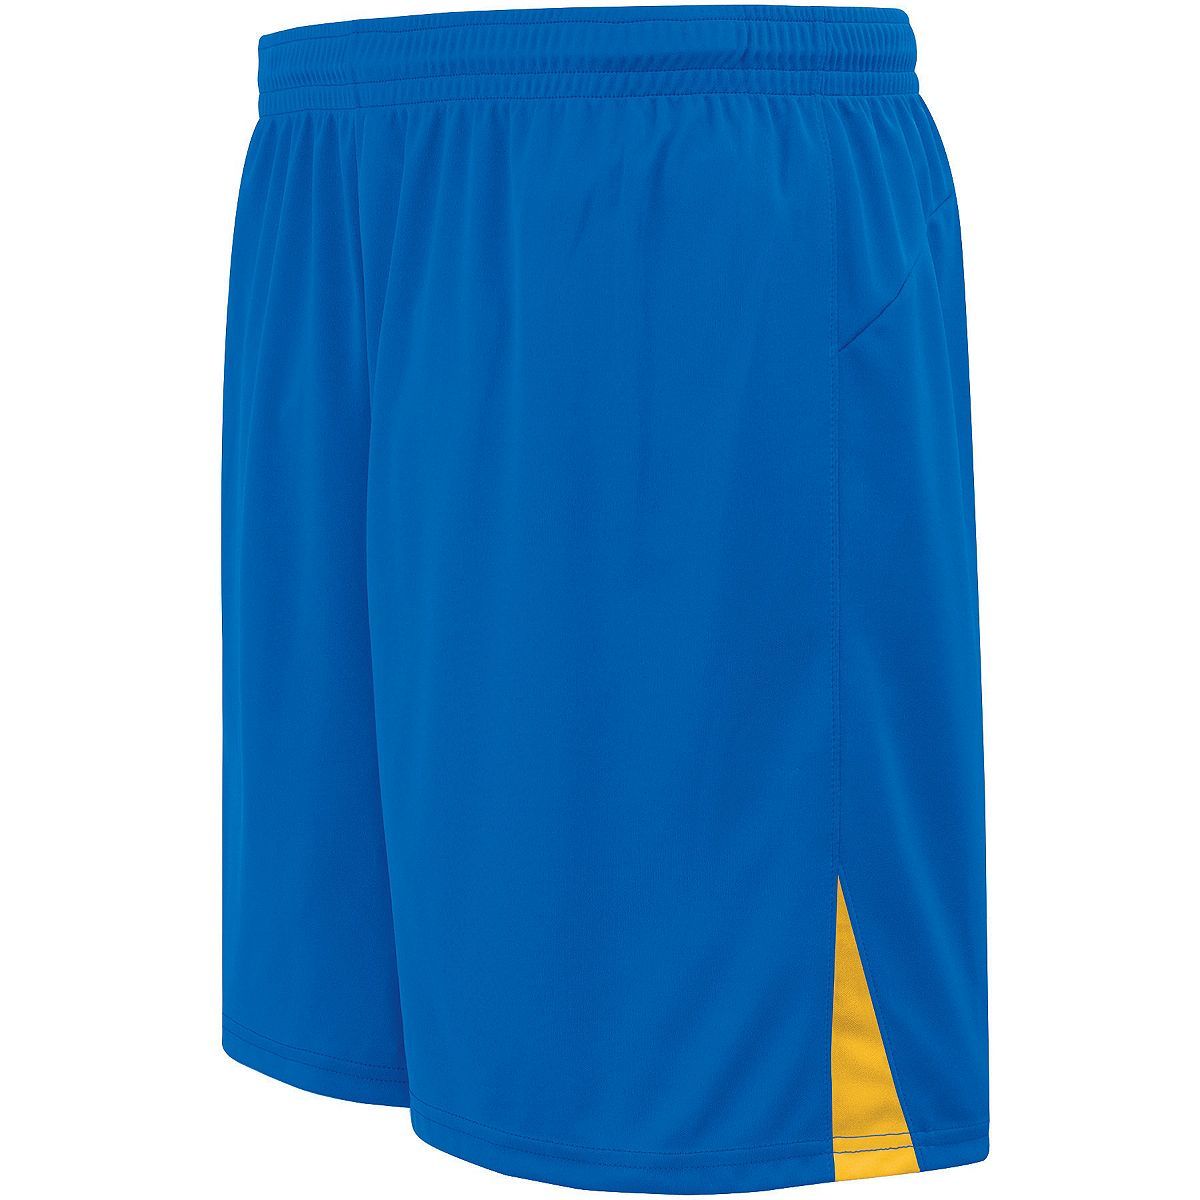 High 5 Youth Hawk Shorts in Royal/Athletic Gold  -Part of the Youth, Youth-Shorts, High5-Products, Soccer, All-Sports-1 product lines at KanaleyCreations.com